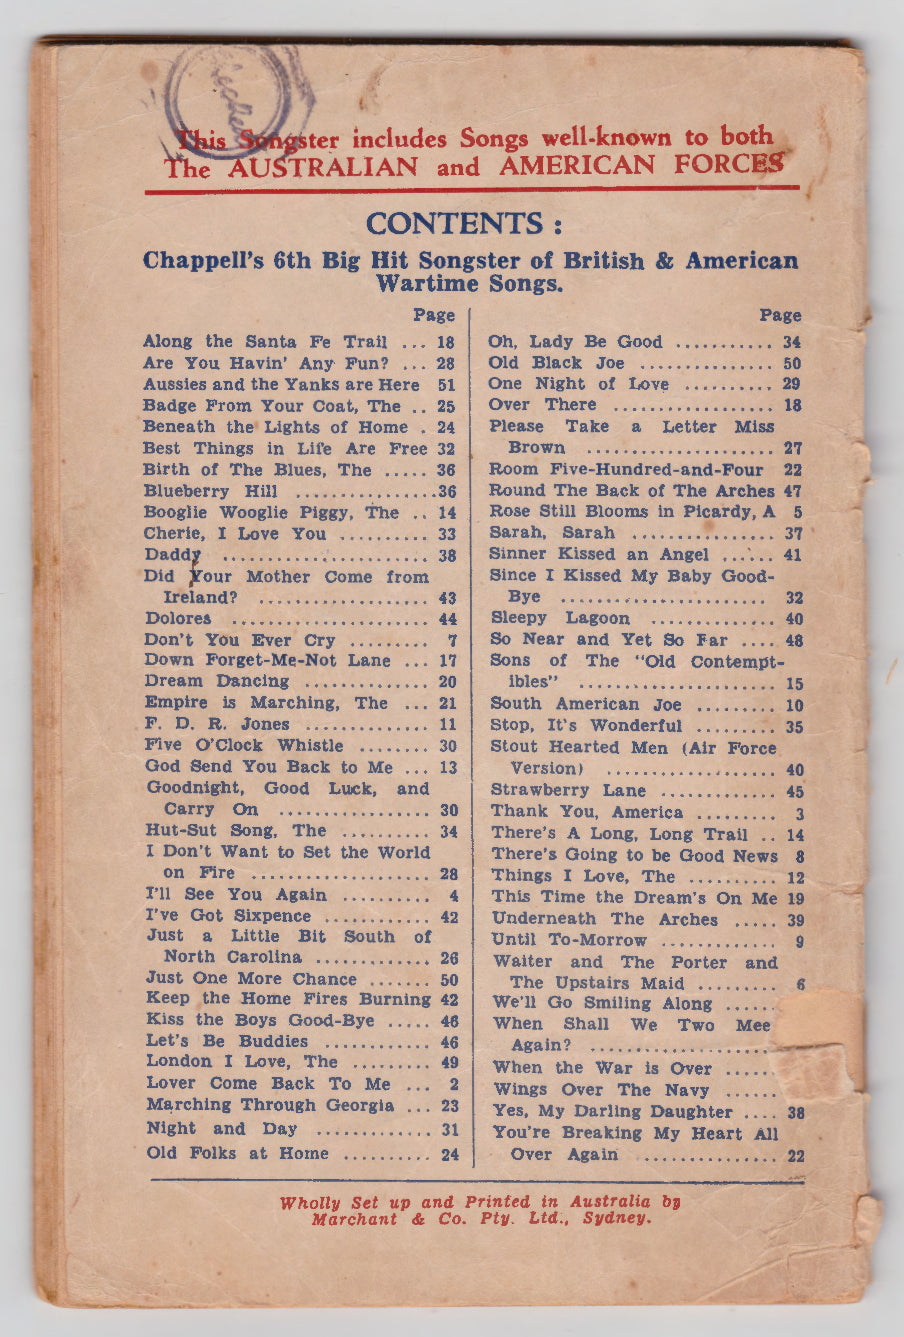 Chappell's Big Hit Songster 6th - British & American Wartime Songs